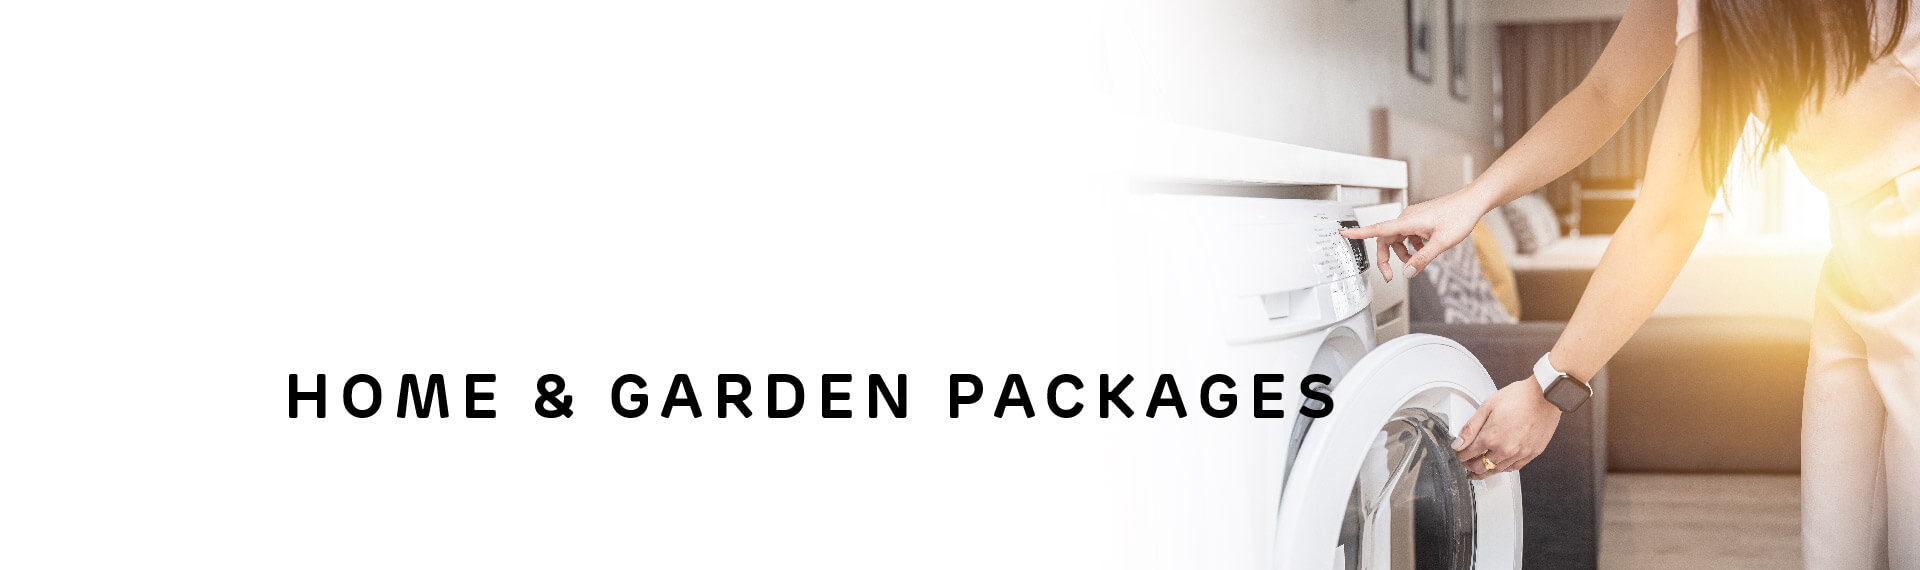 Header image with “Home & Garden Packages” in capital letters; with a photo of a woman loading a front-loading washing machine.